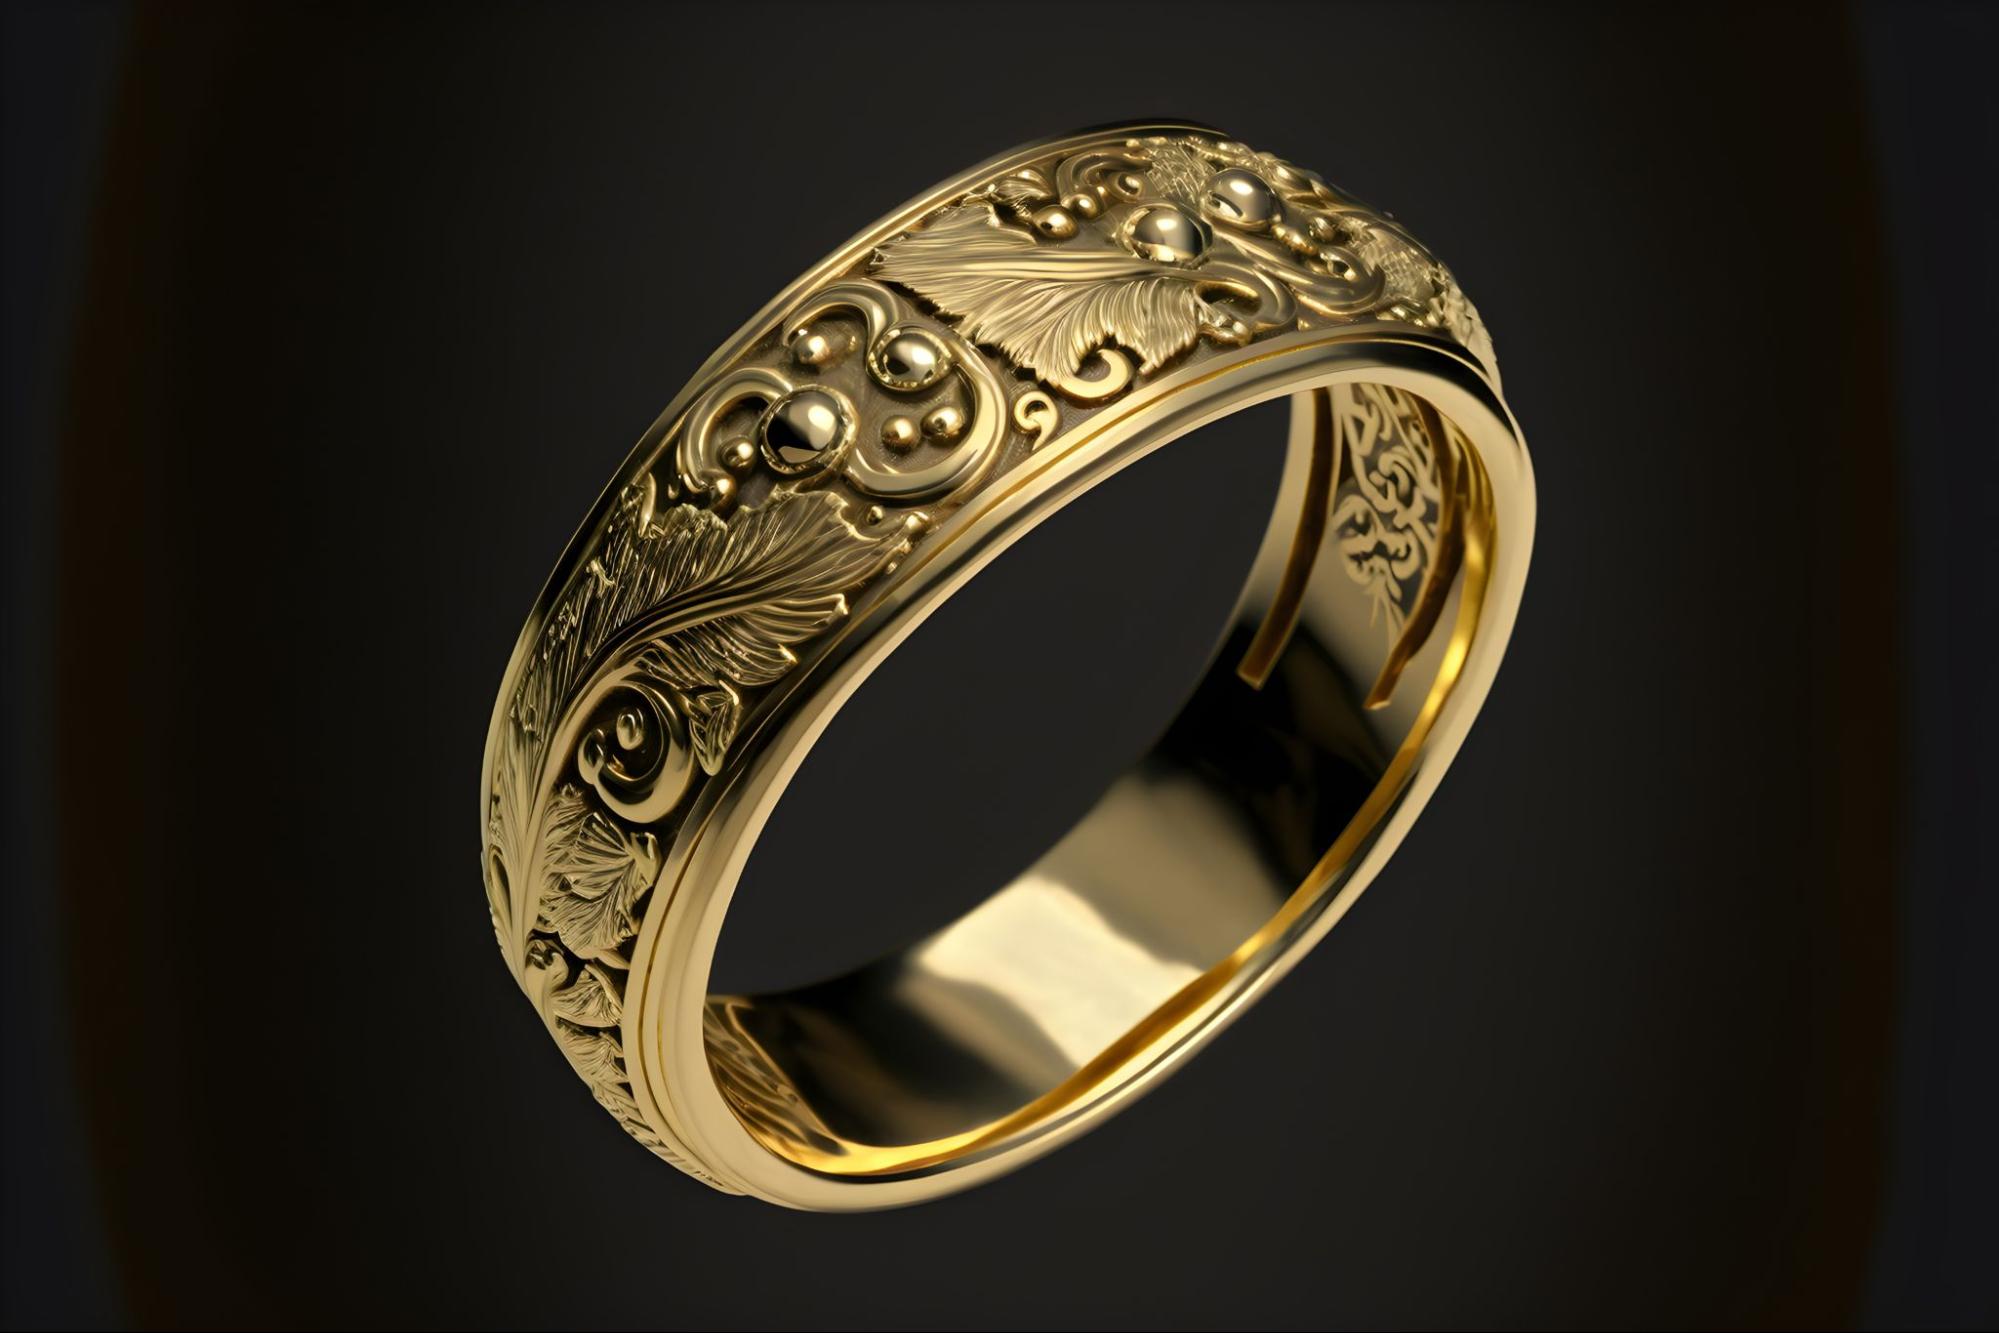 A gold wedding ring with filigree design against a black background